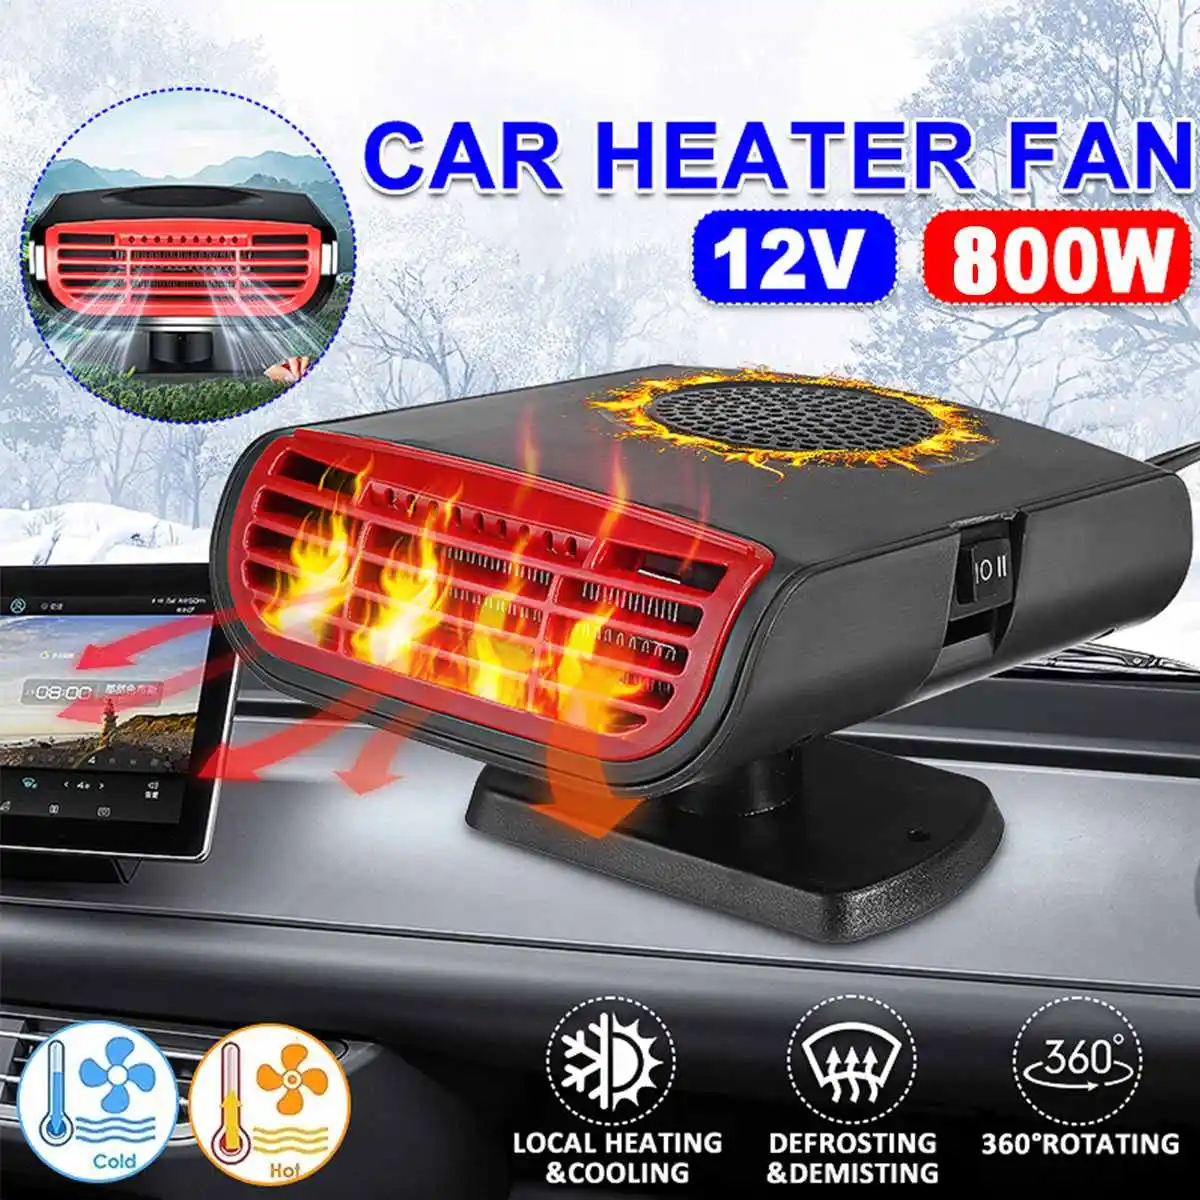 800W 12V Car Heater Heating Cooling Fan Air Purification Portable Dryer Windshield Demister Defroster with Aroma Function